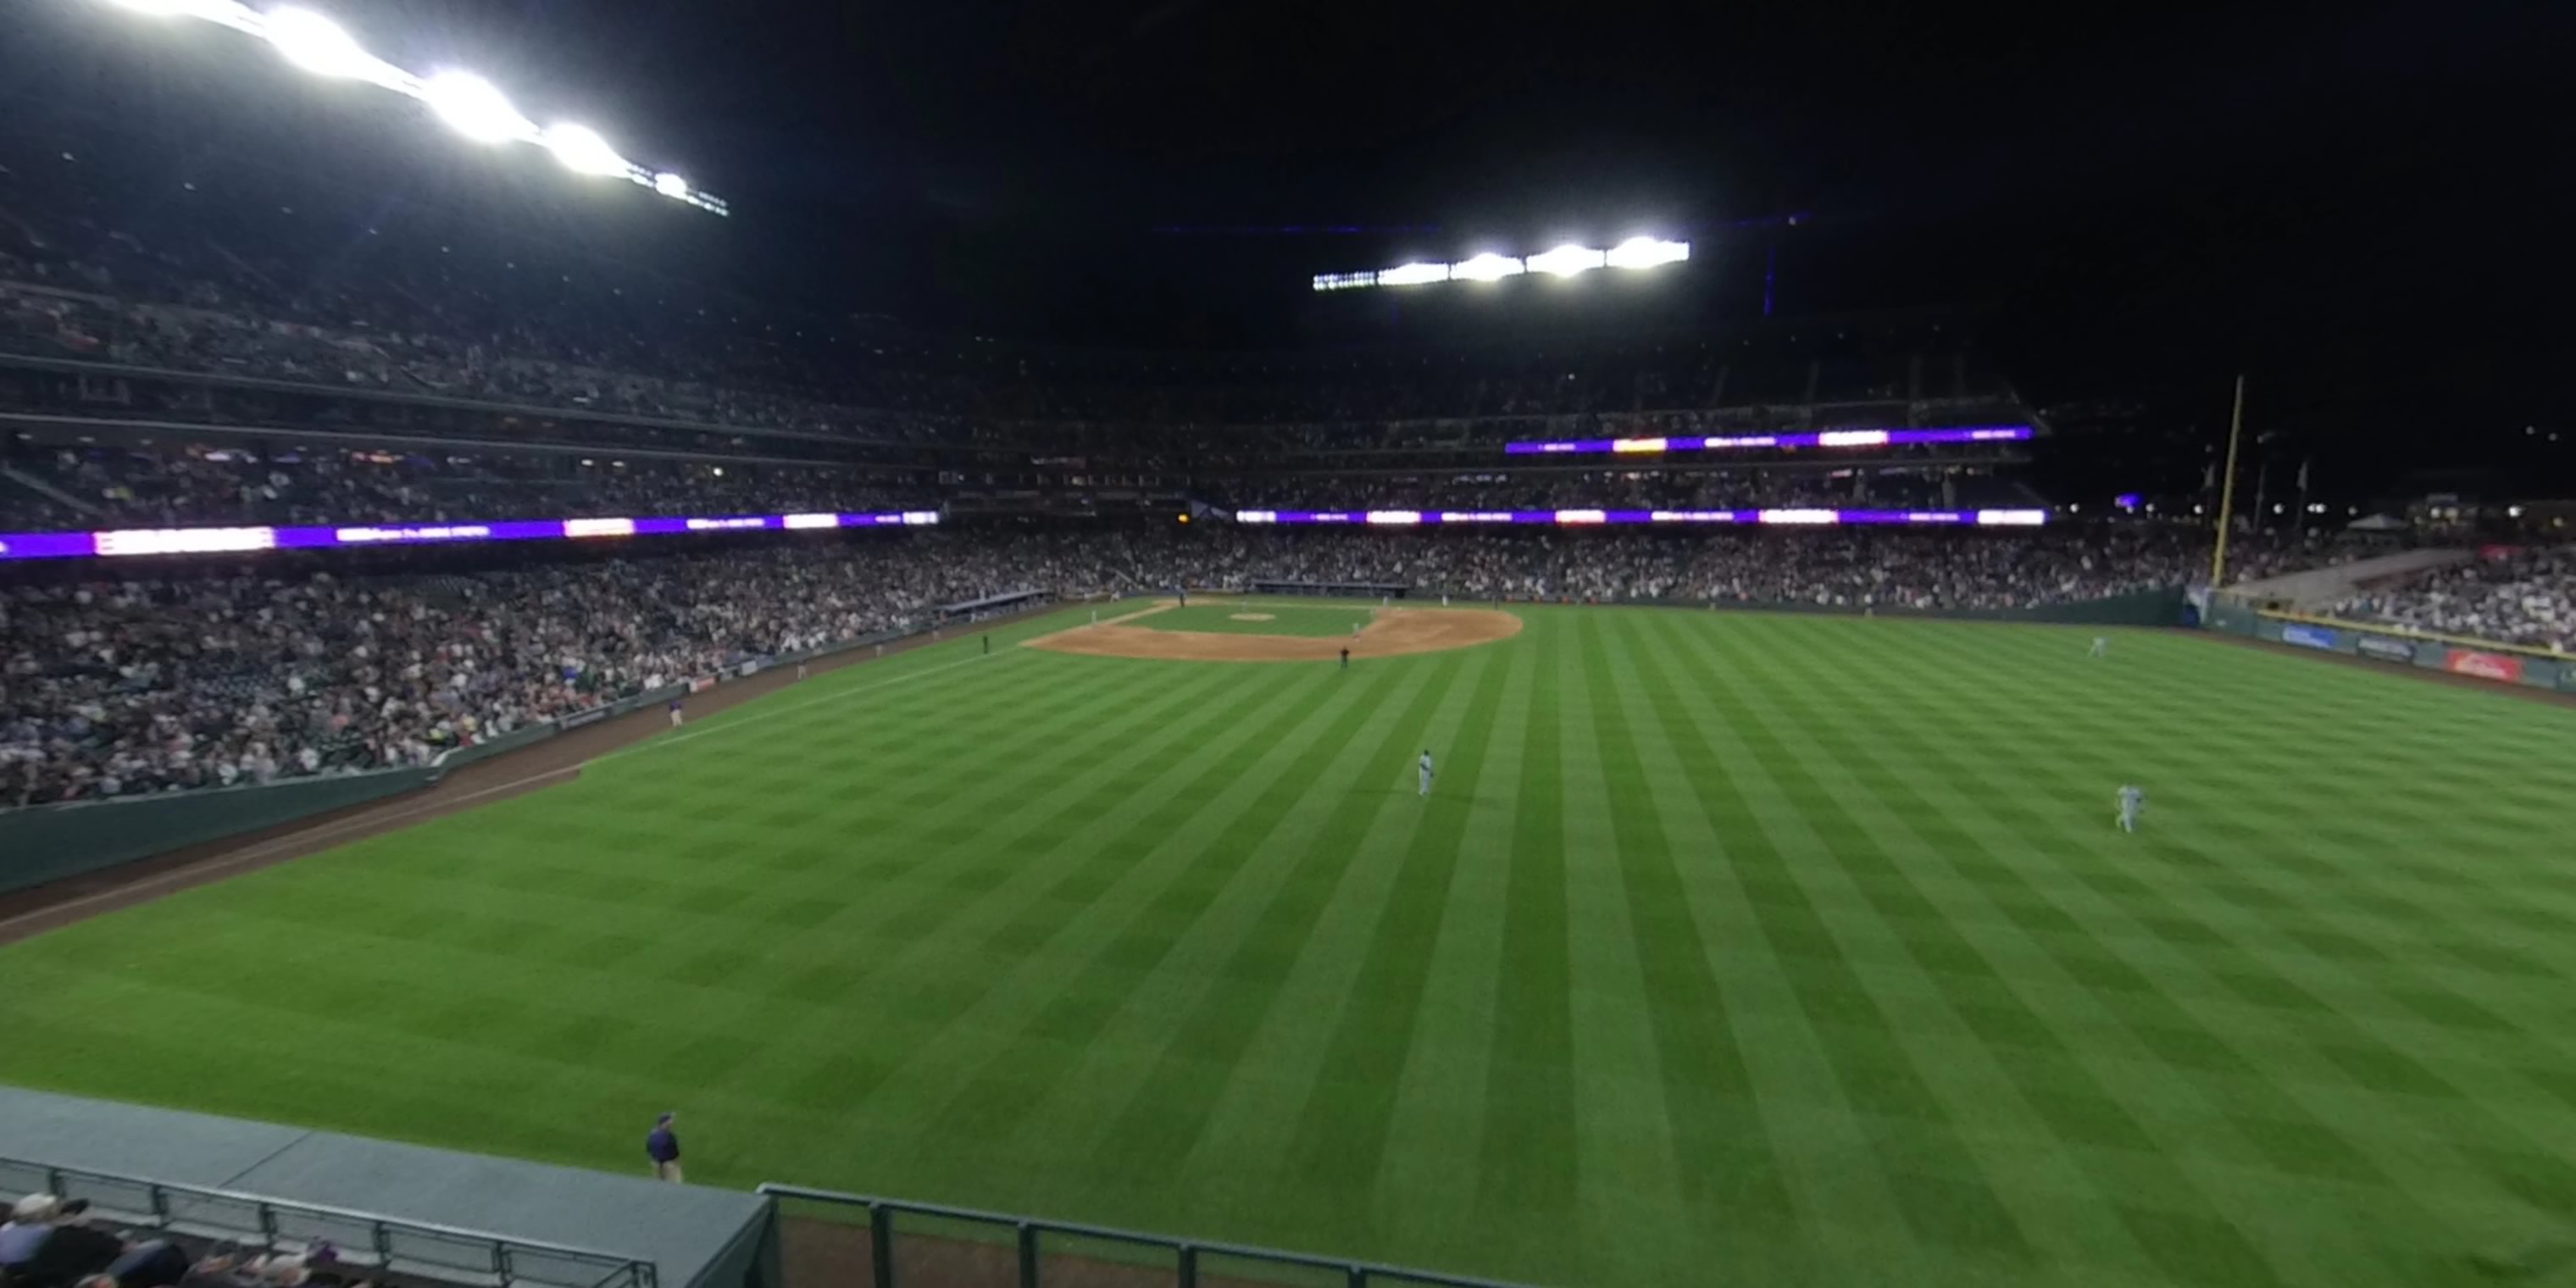 Section 205 at Coors Field 